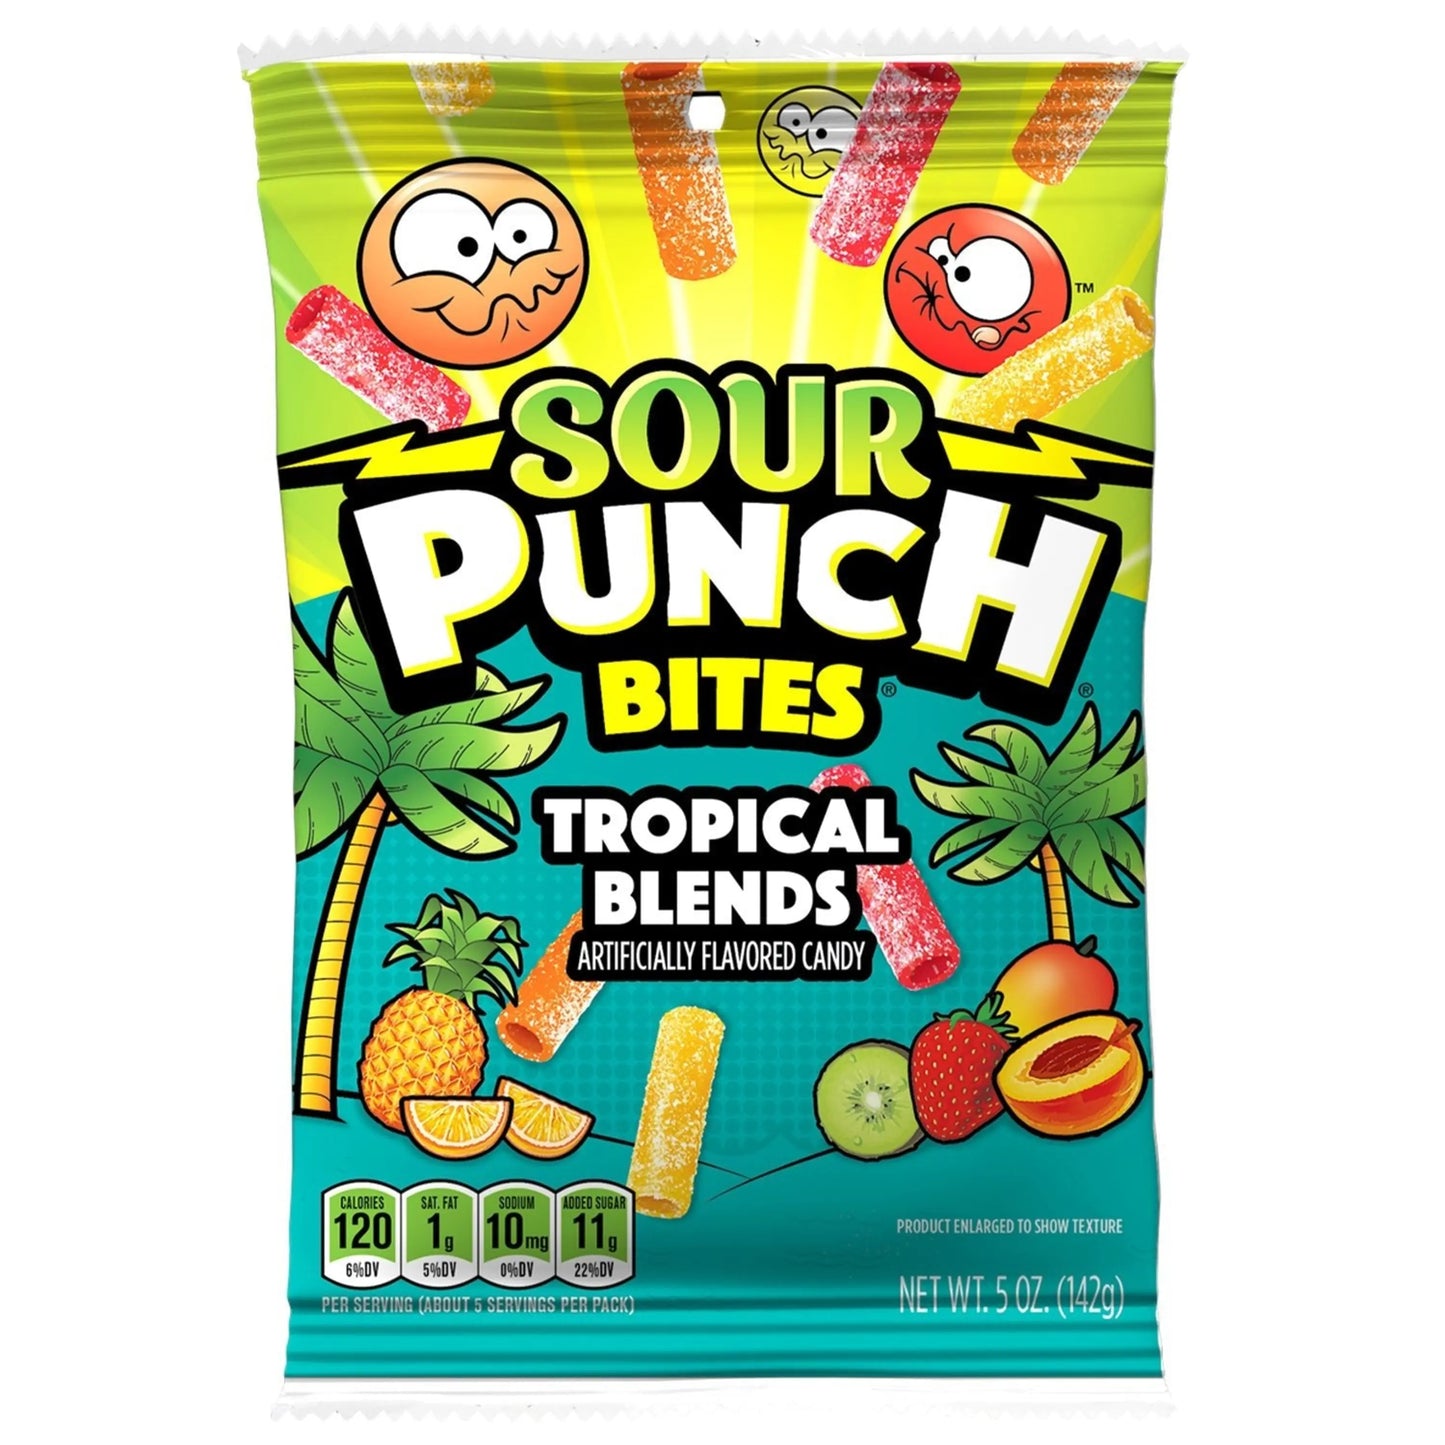 Sour Punch Tropical Flavor Bites Front of Package - Tropical Candies - Sour Punch Bites Tropical Blends